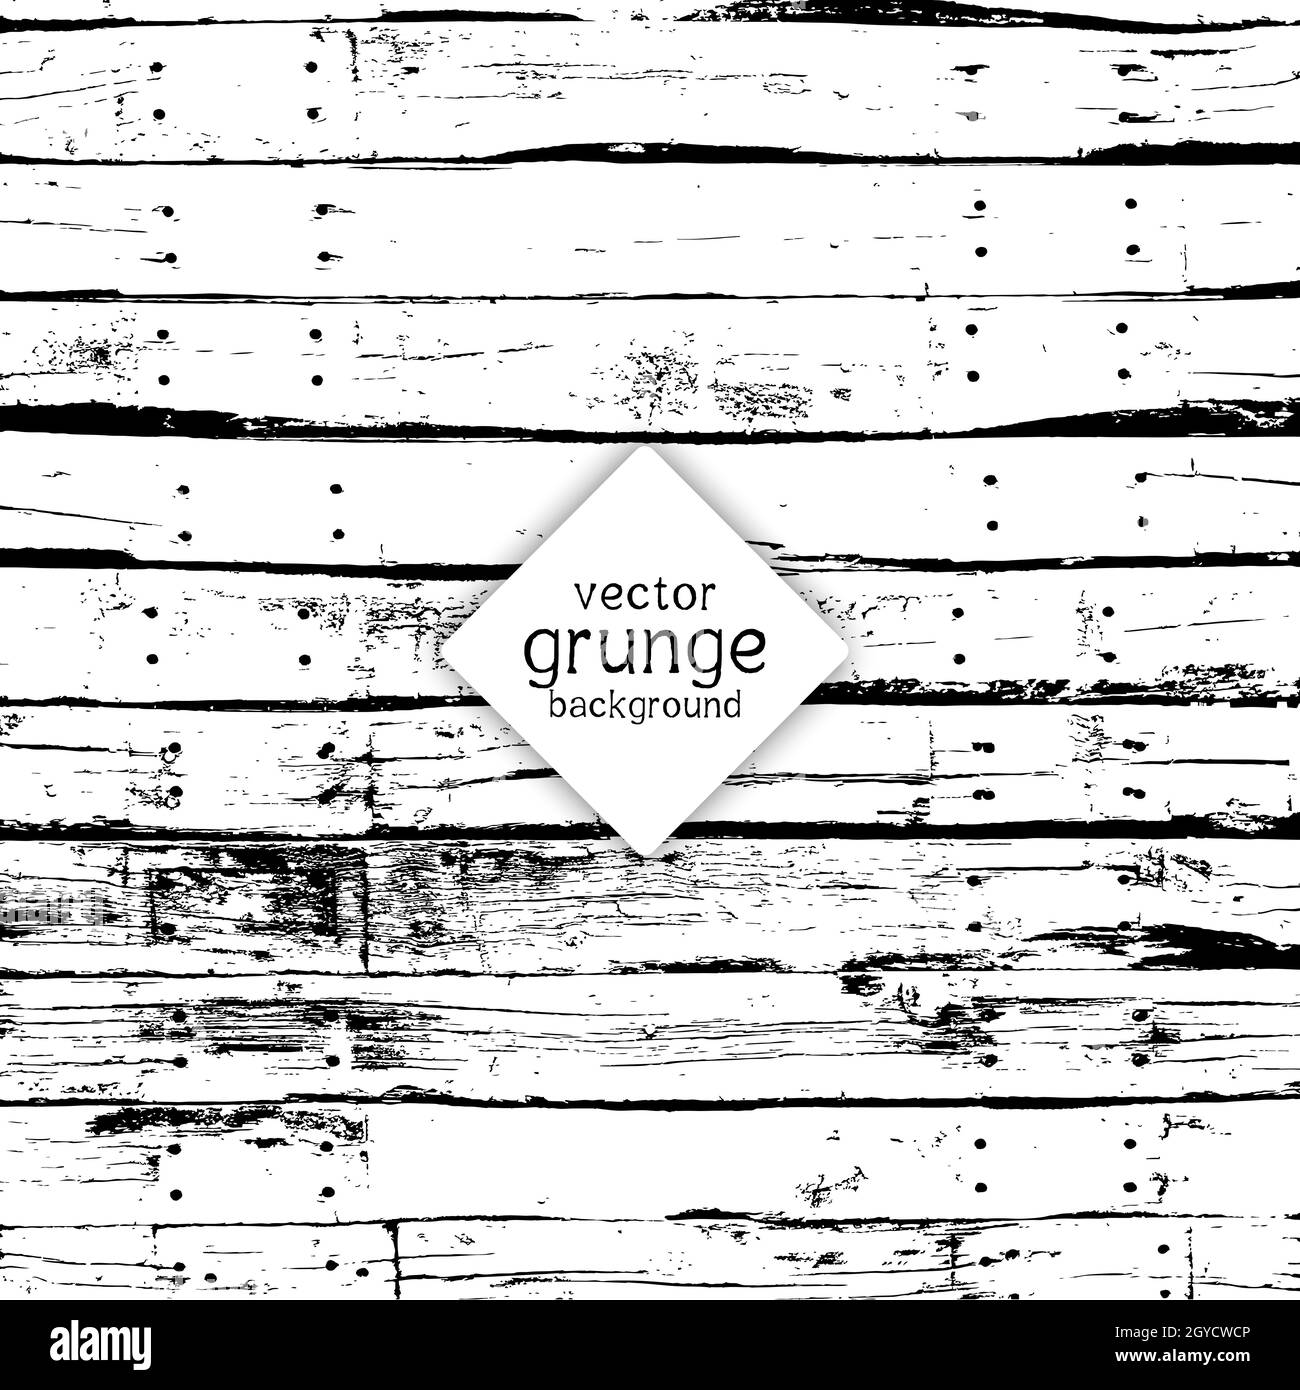 Grunge style background with an old wood texture Stock Photo